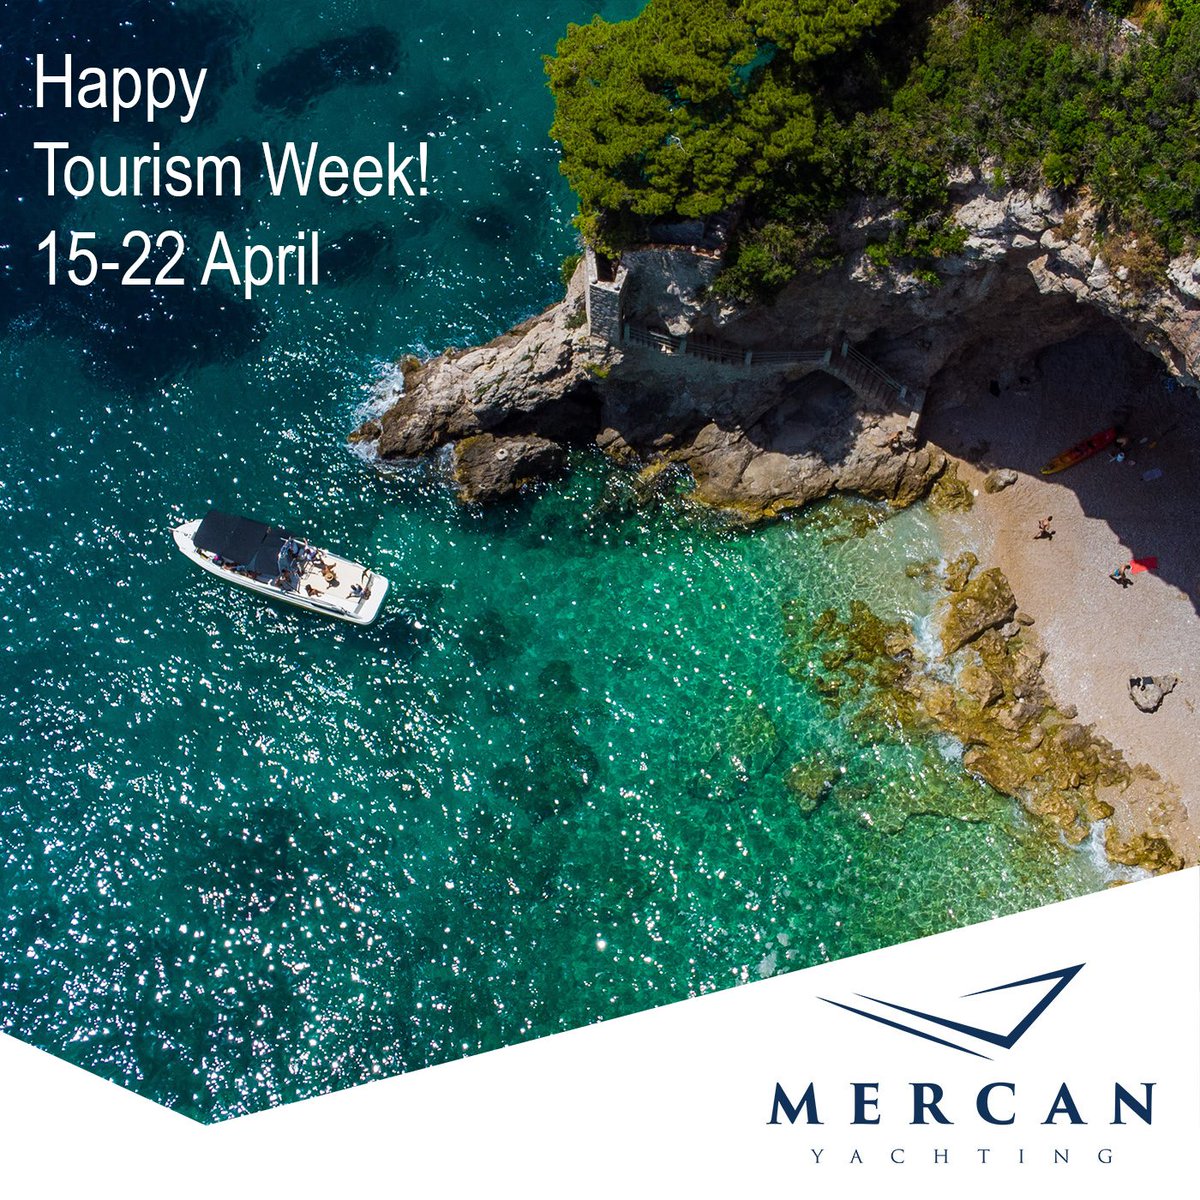 It is very valuable to discover the history and nature of the world and to get to know different cultures. We wish you a season in which we will travel in comfort and health... Happy 15-22 April Tourism Week! 🌊

#MercanYachting #tourismweek #happytourismweek #tourism #travel